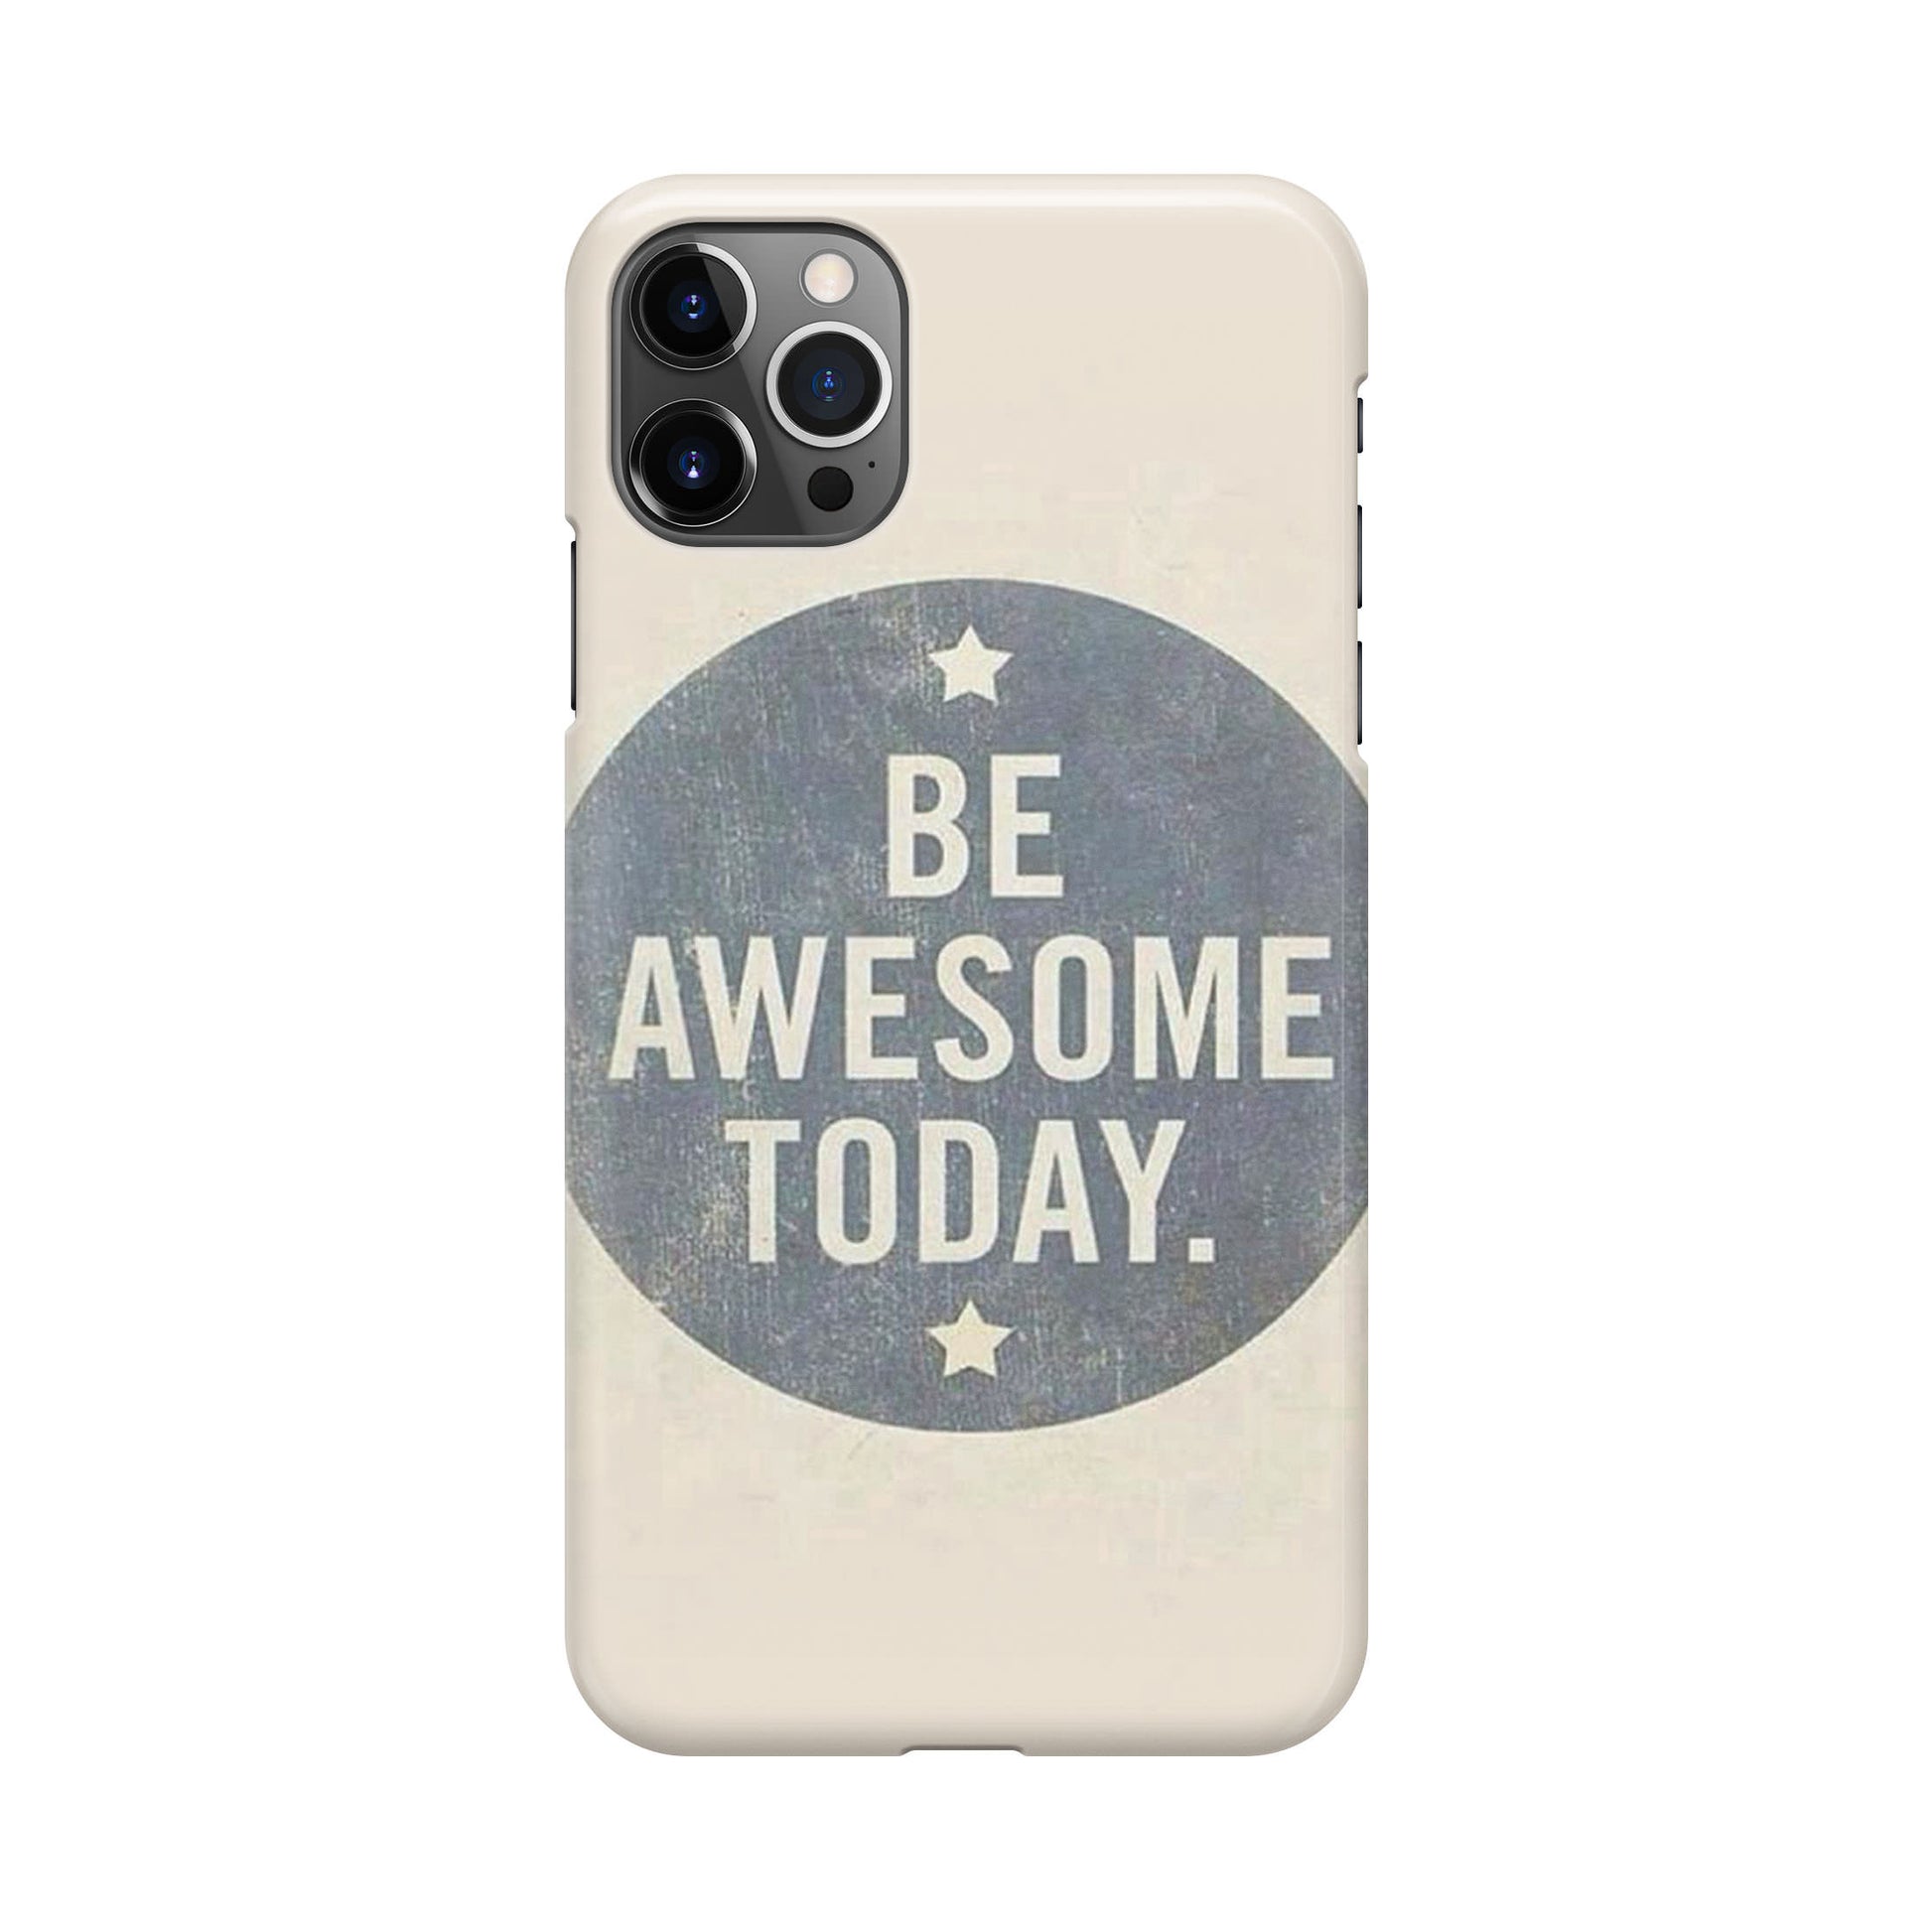 Be Awesome Today Quotes iPhone 12 Pro Max Case